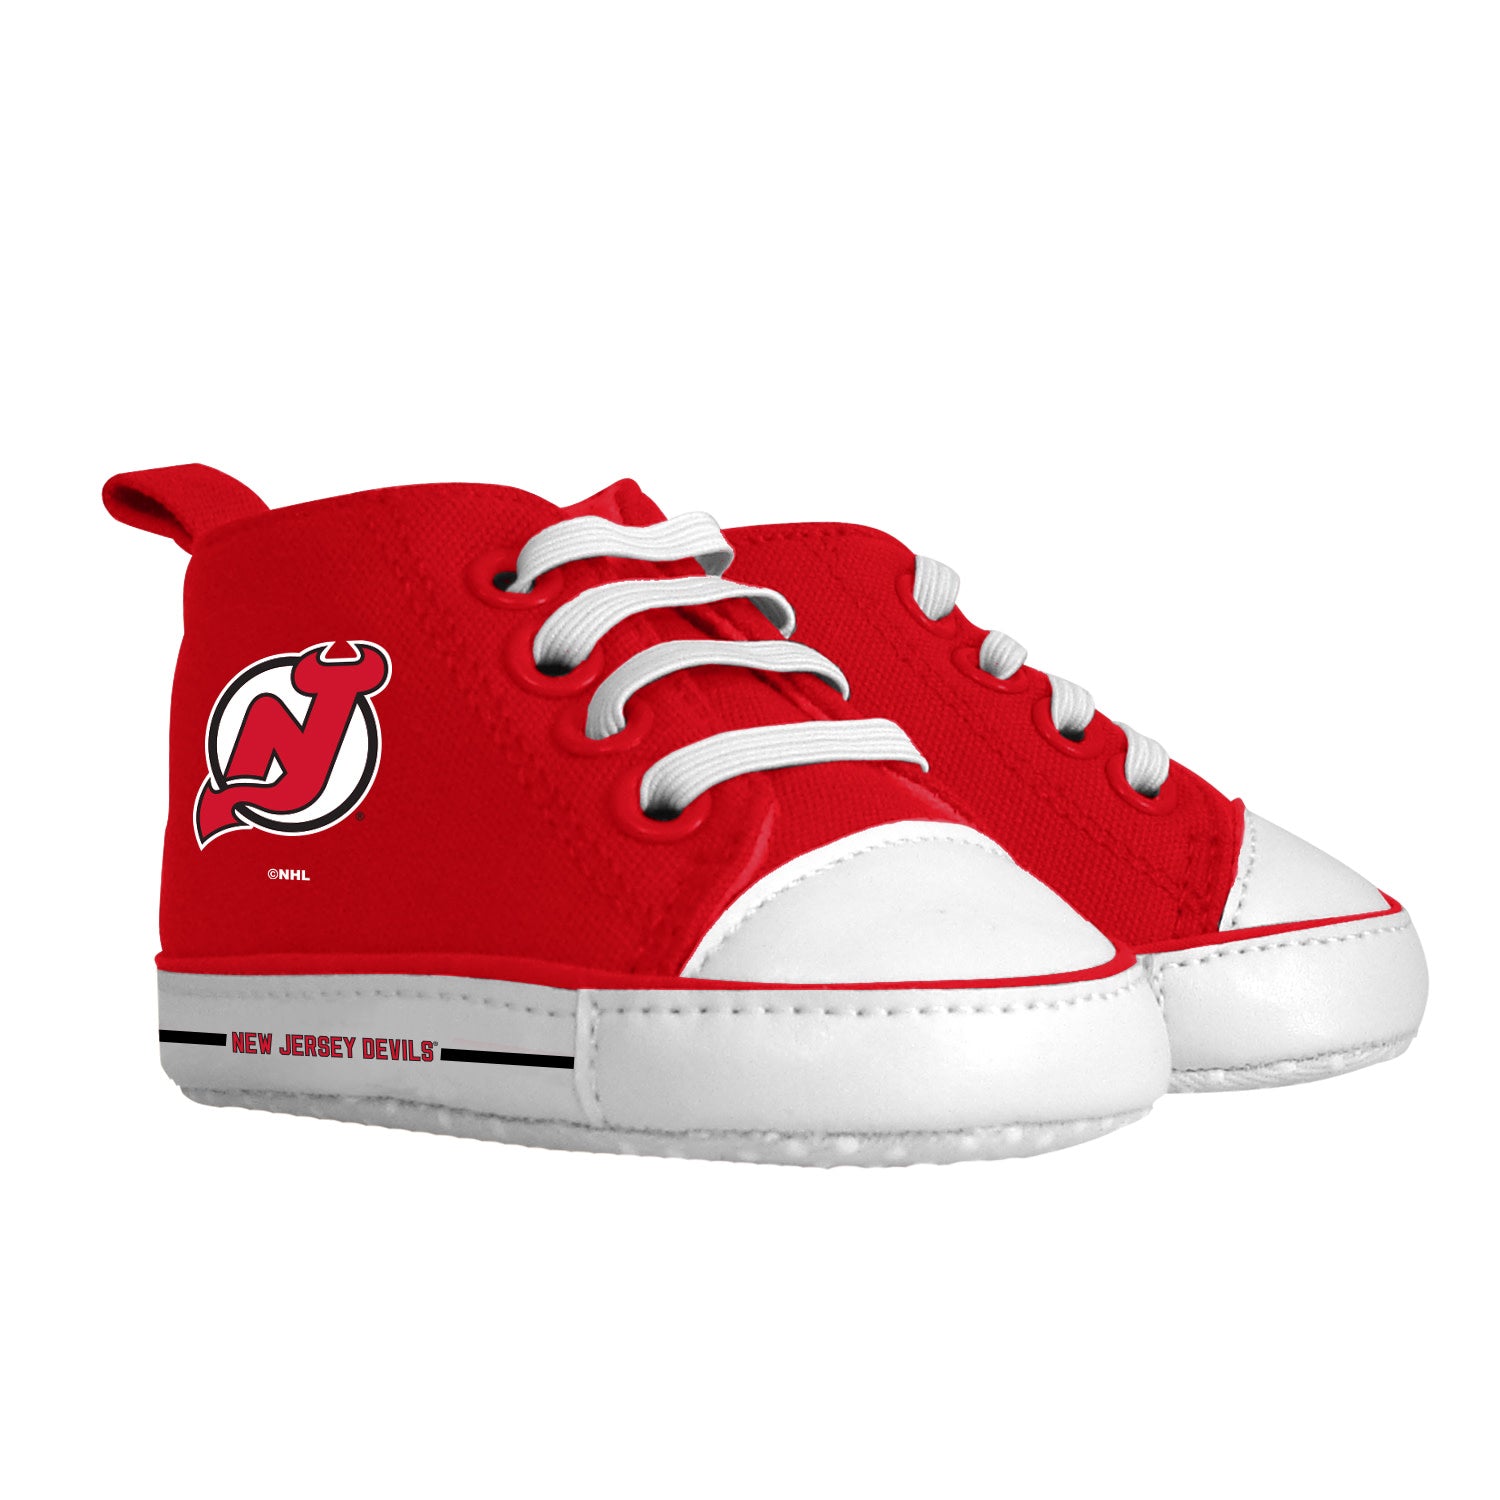 New Jersey Devils Baby Shoes